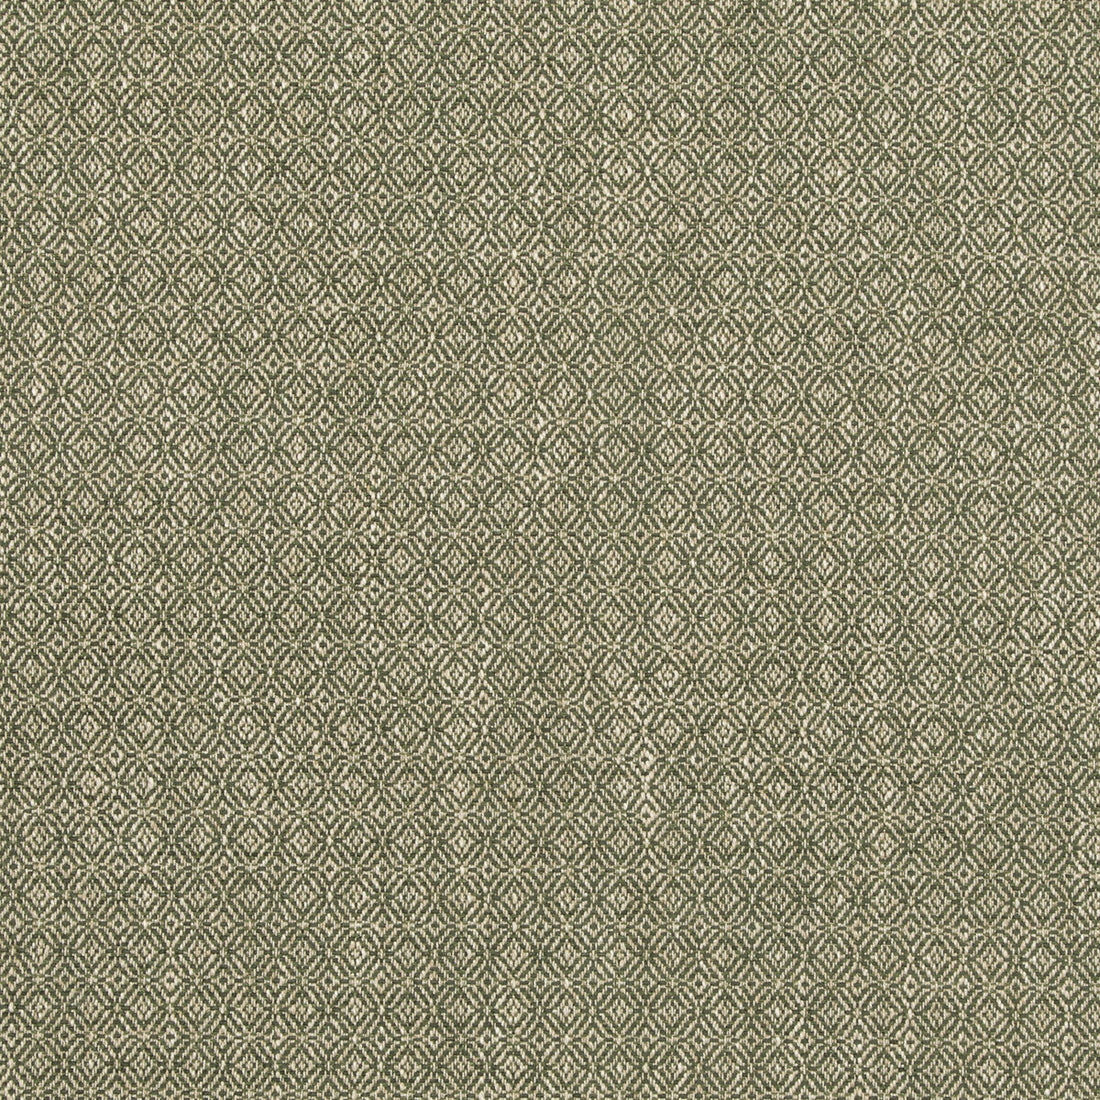 Kenton fabric in green color - pattern BF10868.735.0 - by G P &amp; J Baker in the Essential Colours II collection